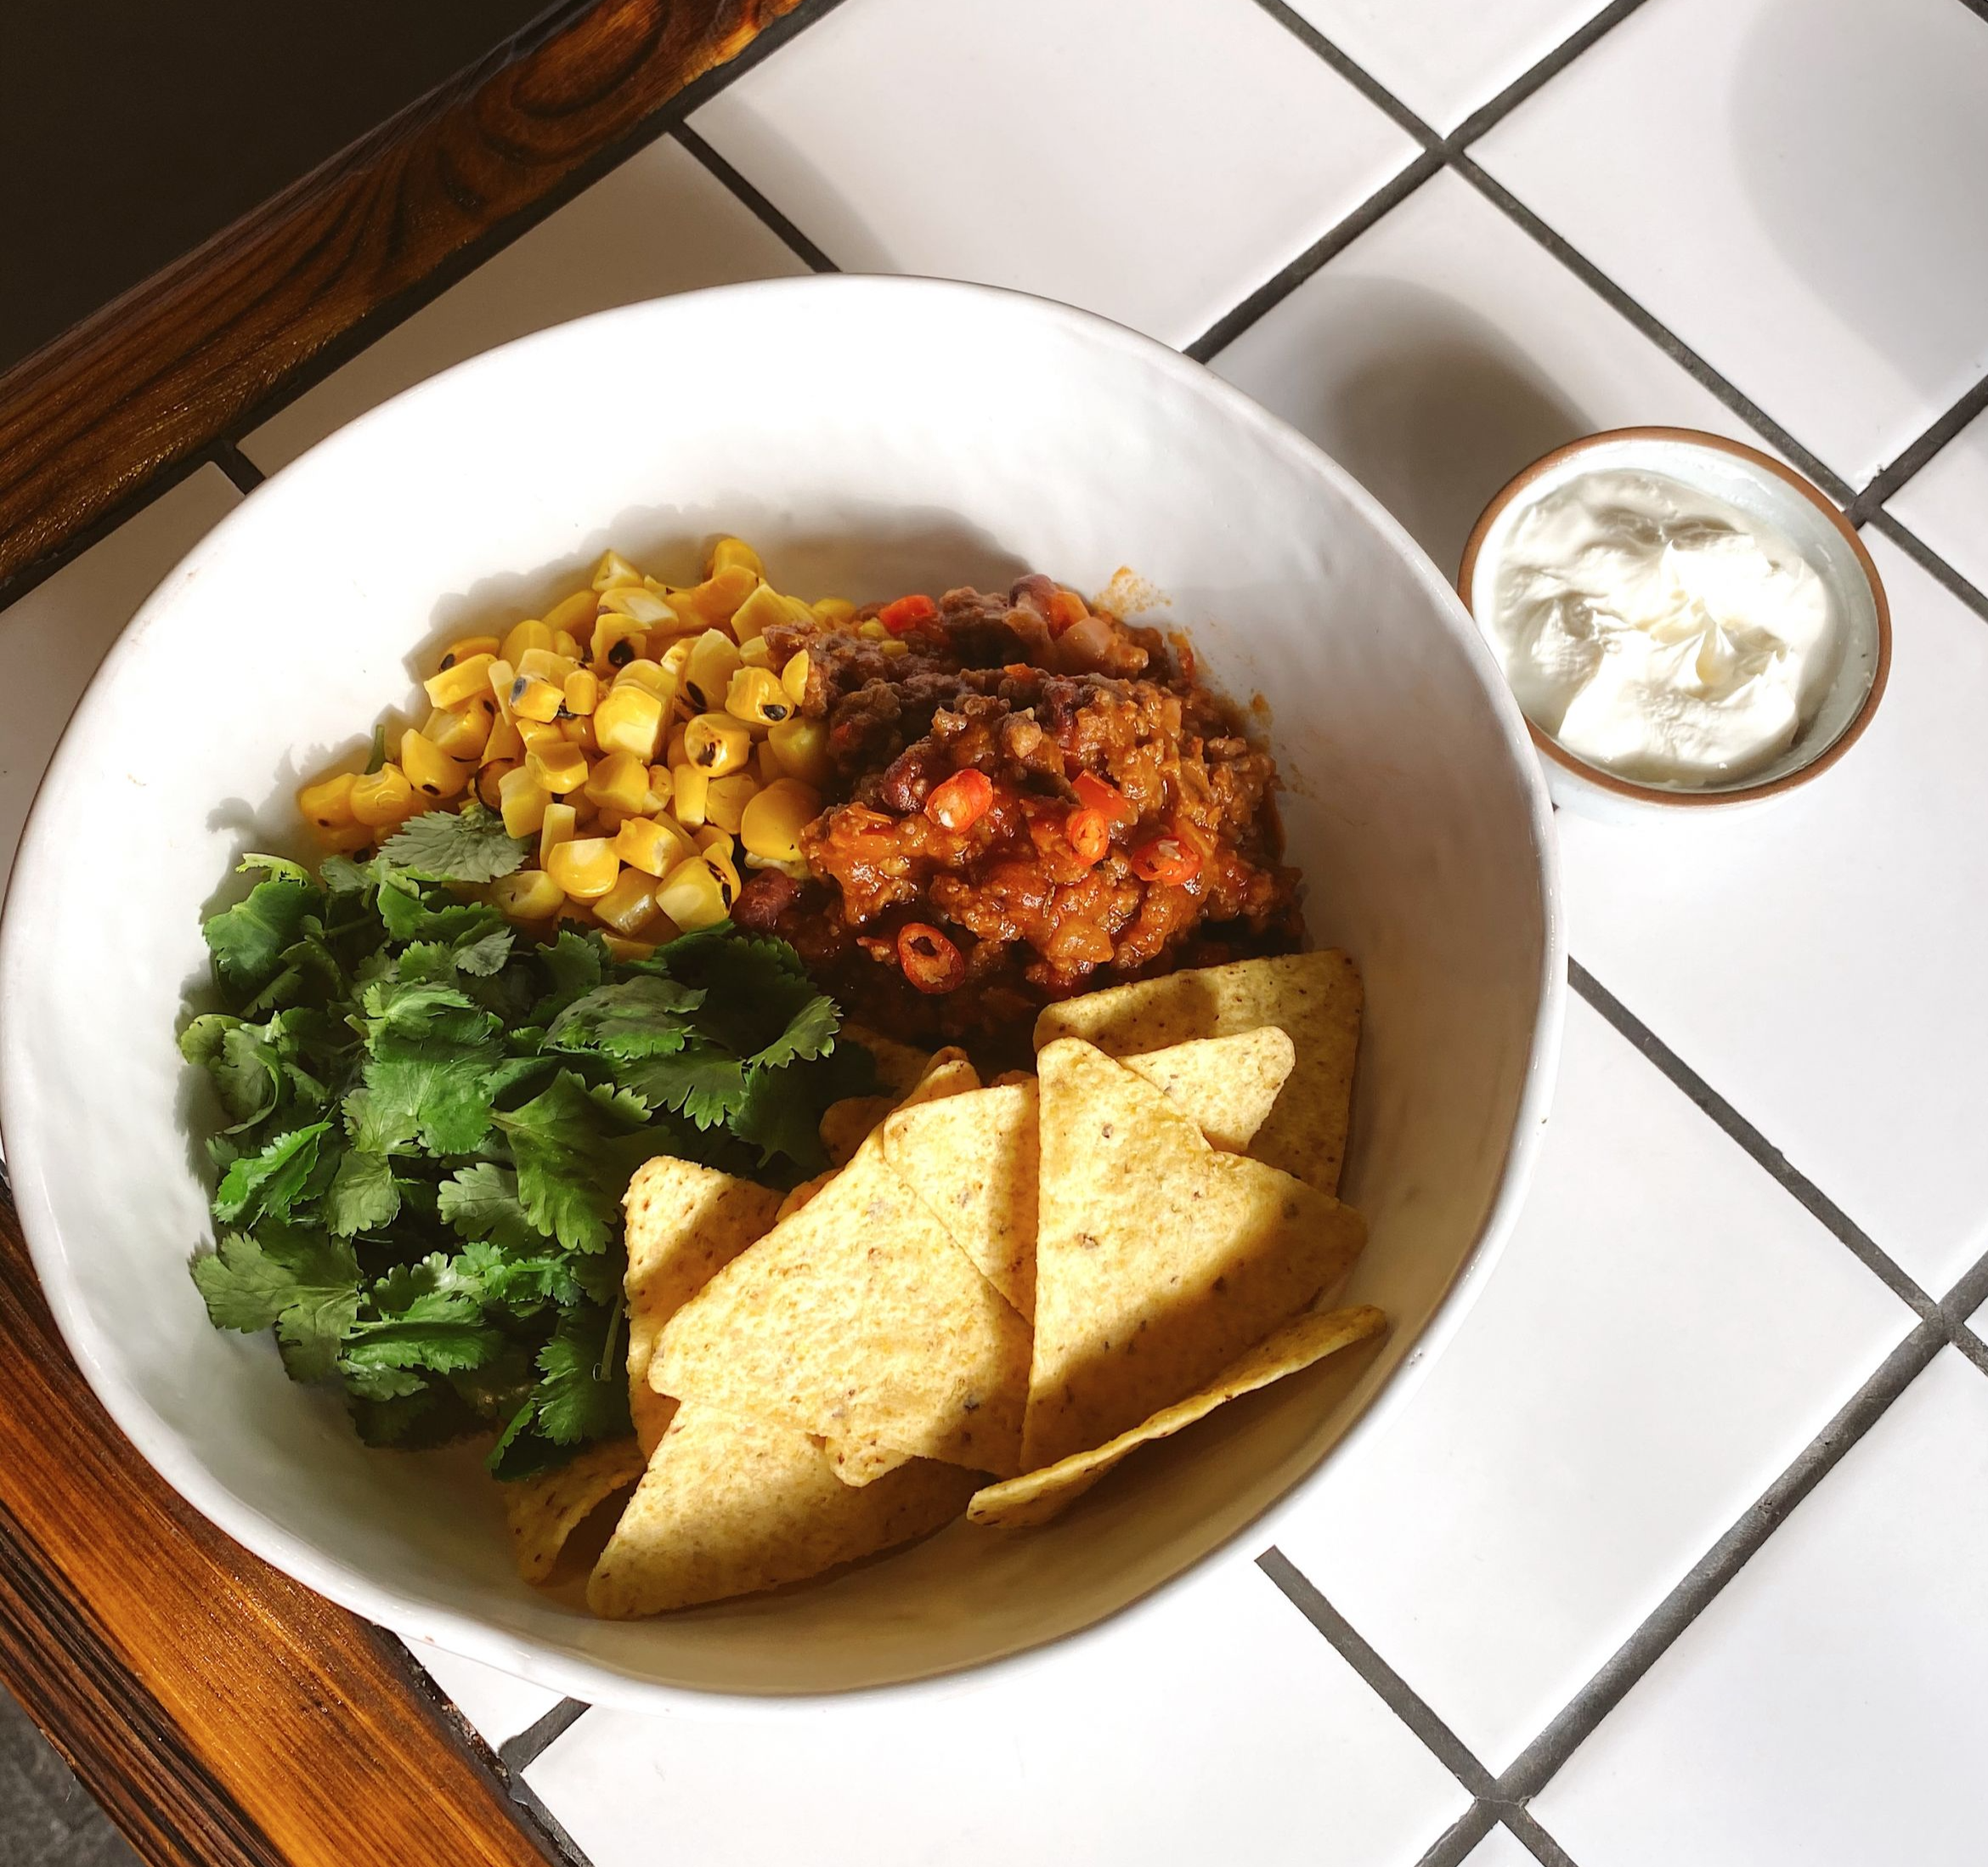 Chili con carne with beef and lamb, nachos, corn and sour cream